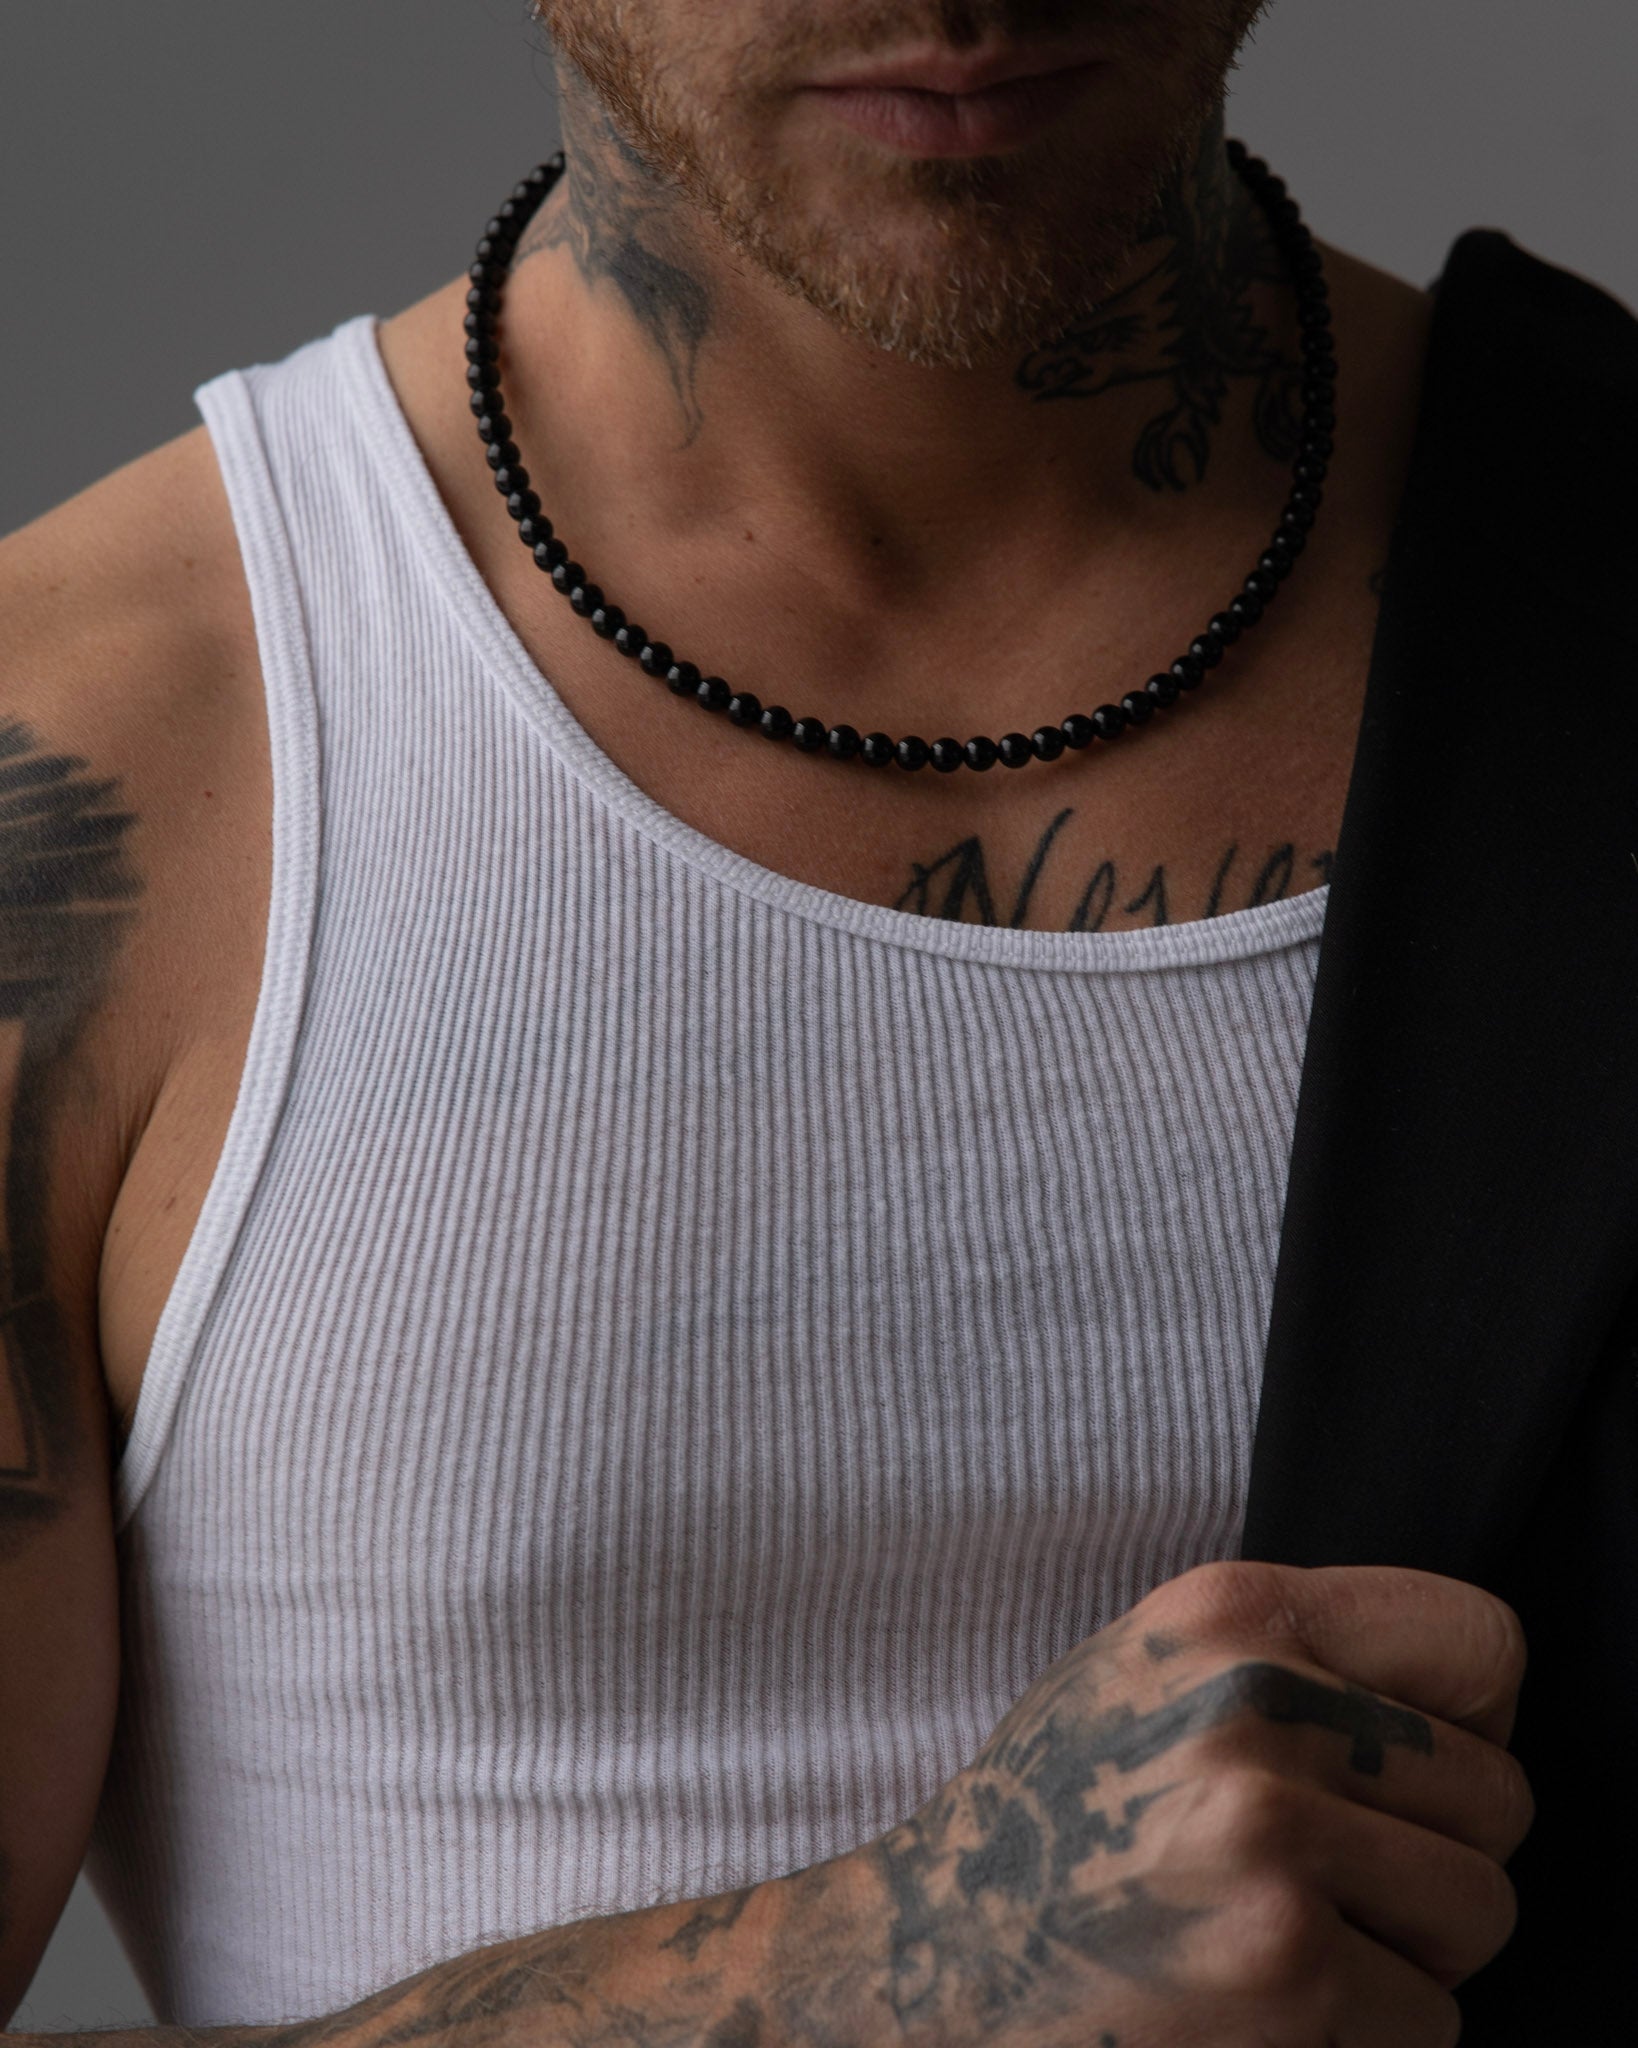 Dark Var men's necklace by Five Jwlry, designed with black onyx stone pearls complemented by a black stainless steel buckle. Available in sizes 45cm and 50cm. Crafted from water-resistant 316L stainless steel. Hypoallergenic with a 2-year warranty.